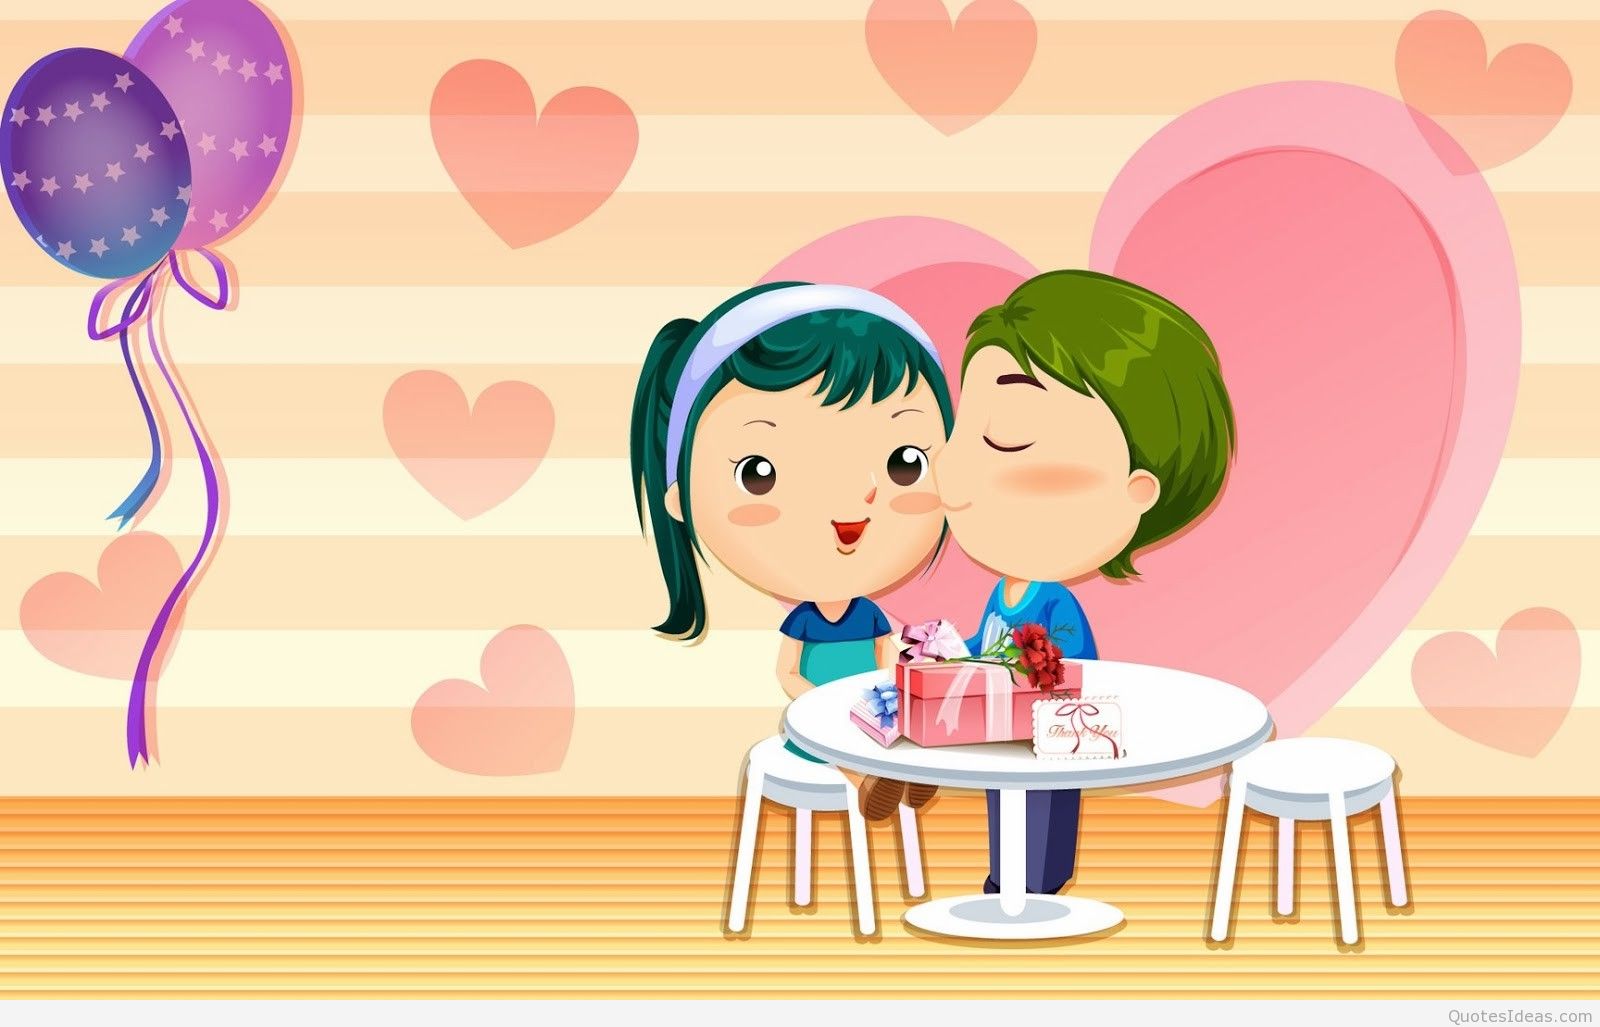 Happy Kiss Day 2014 Anime Couple Hd Wallpaper - Love Cartoon Images  Download - 1600x1027 Wallpaper 